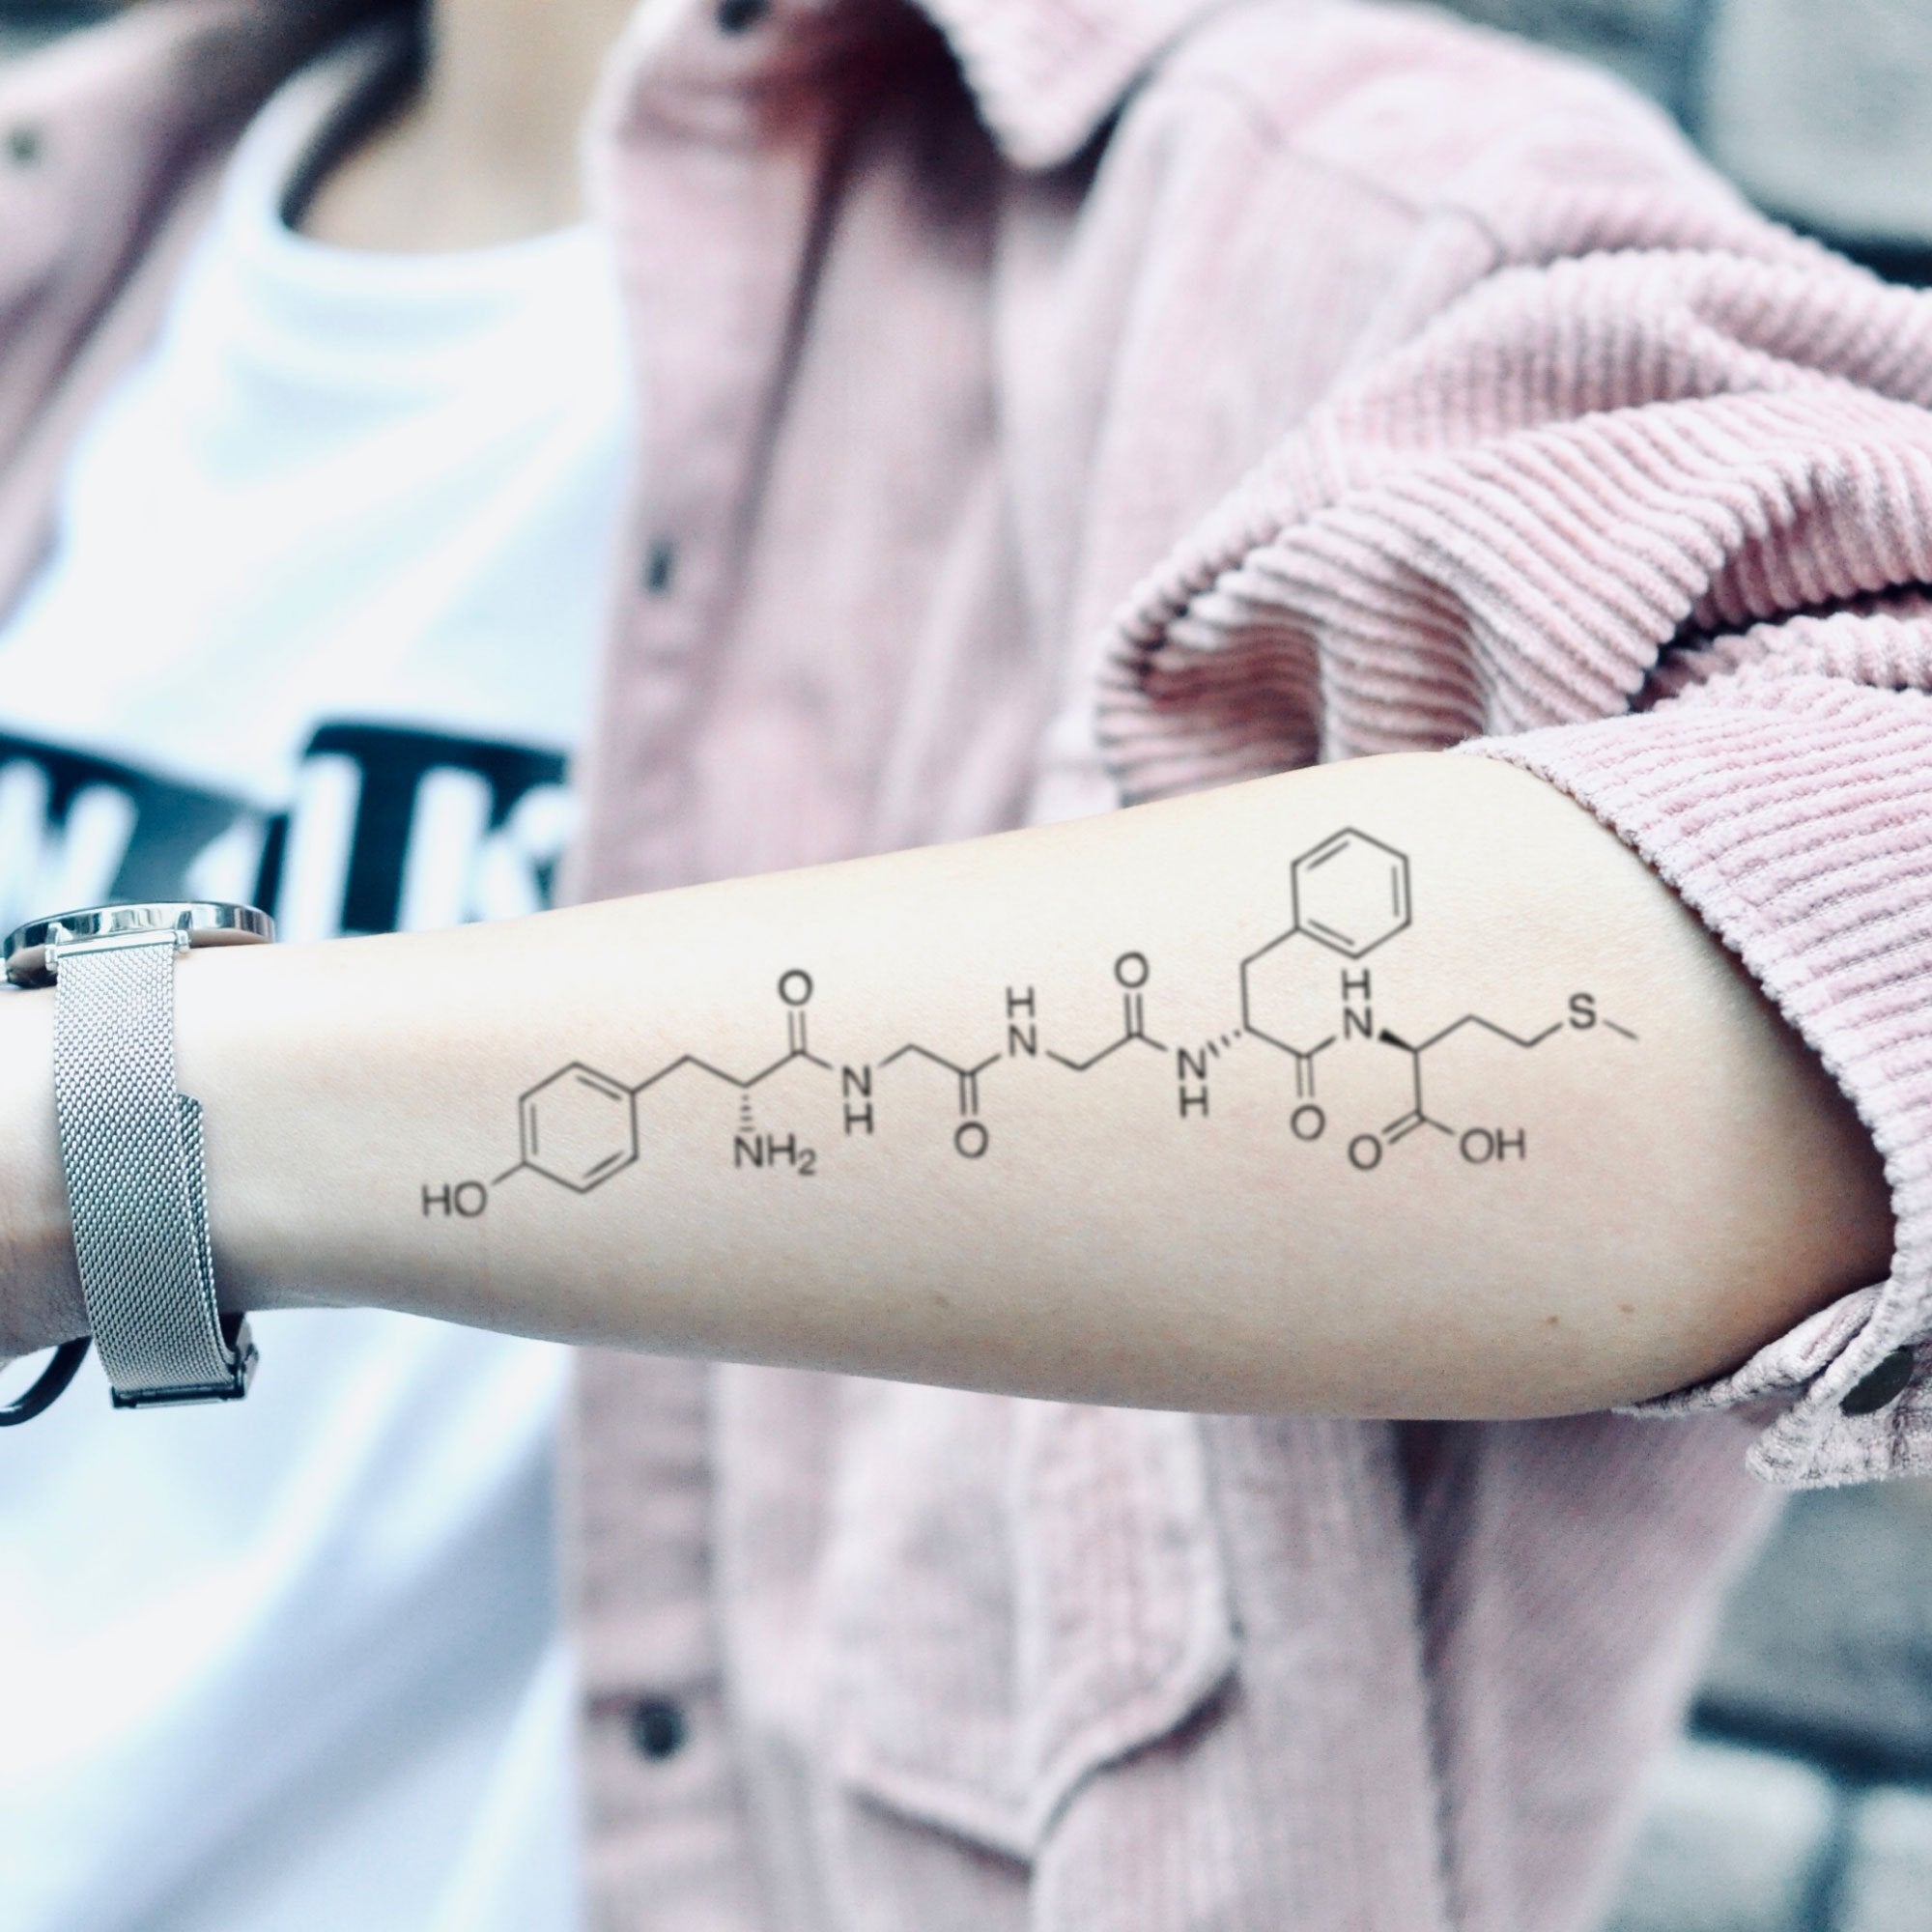 molecule tattoo for a friend 7rl and then 5rl for the text should i have  used a smaller needle for the text it didnt come out as clean as id like 